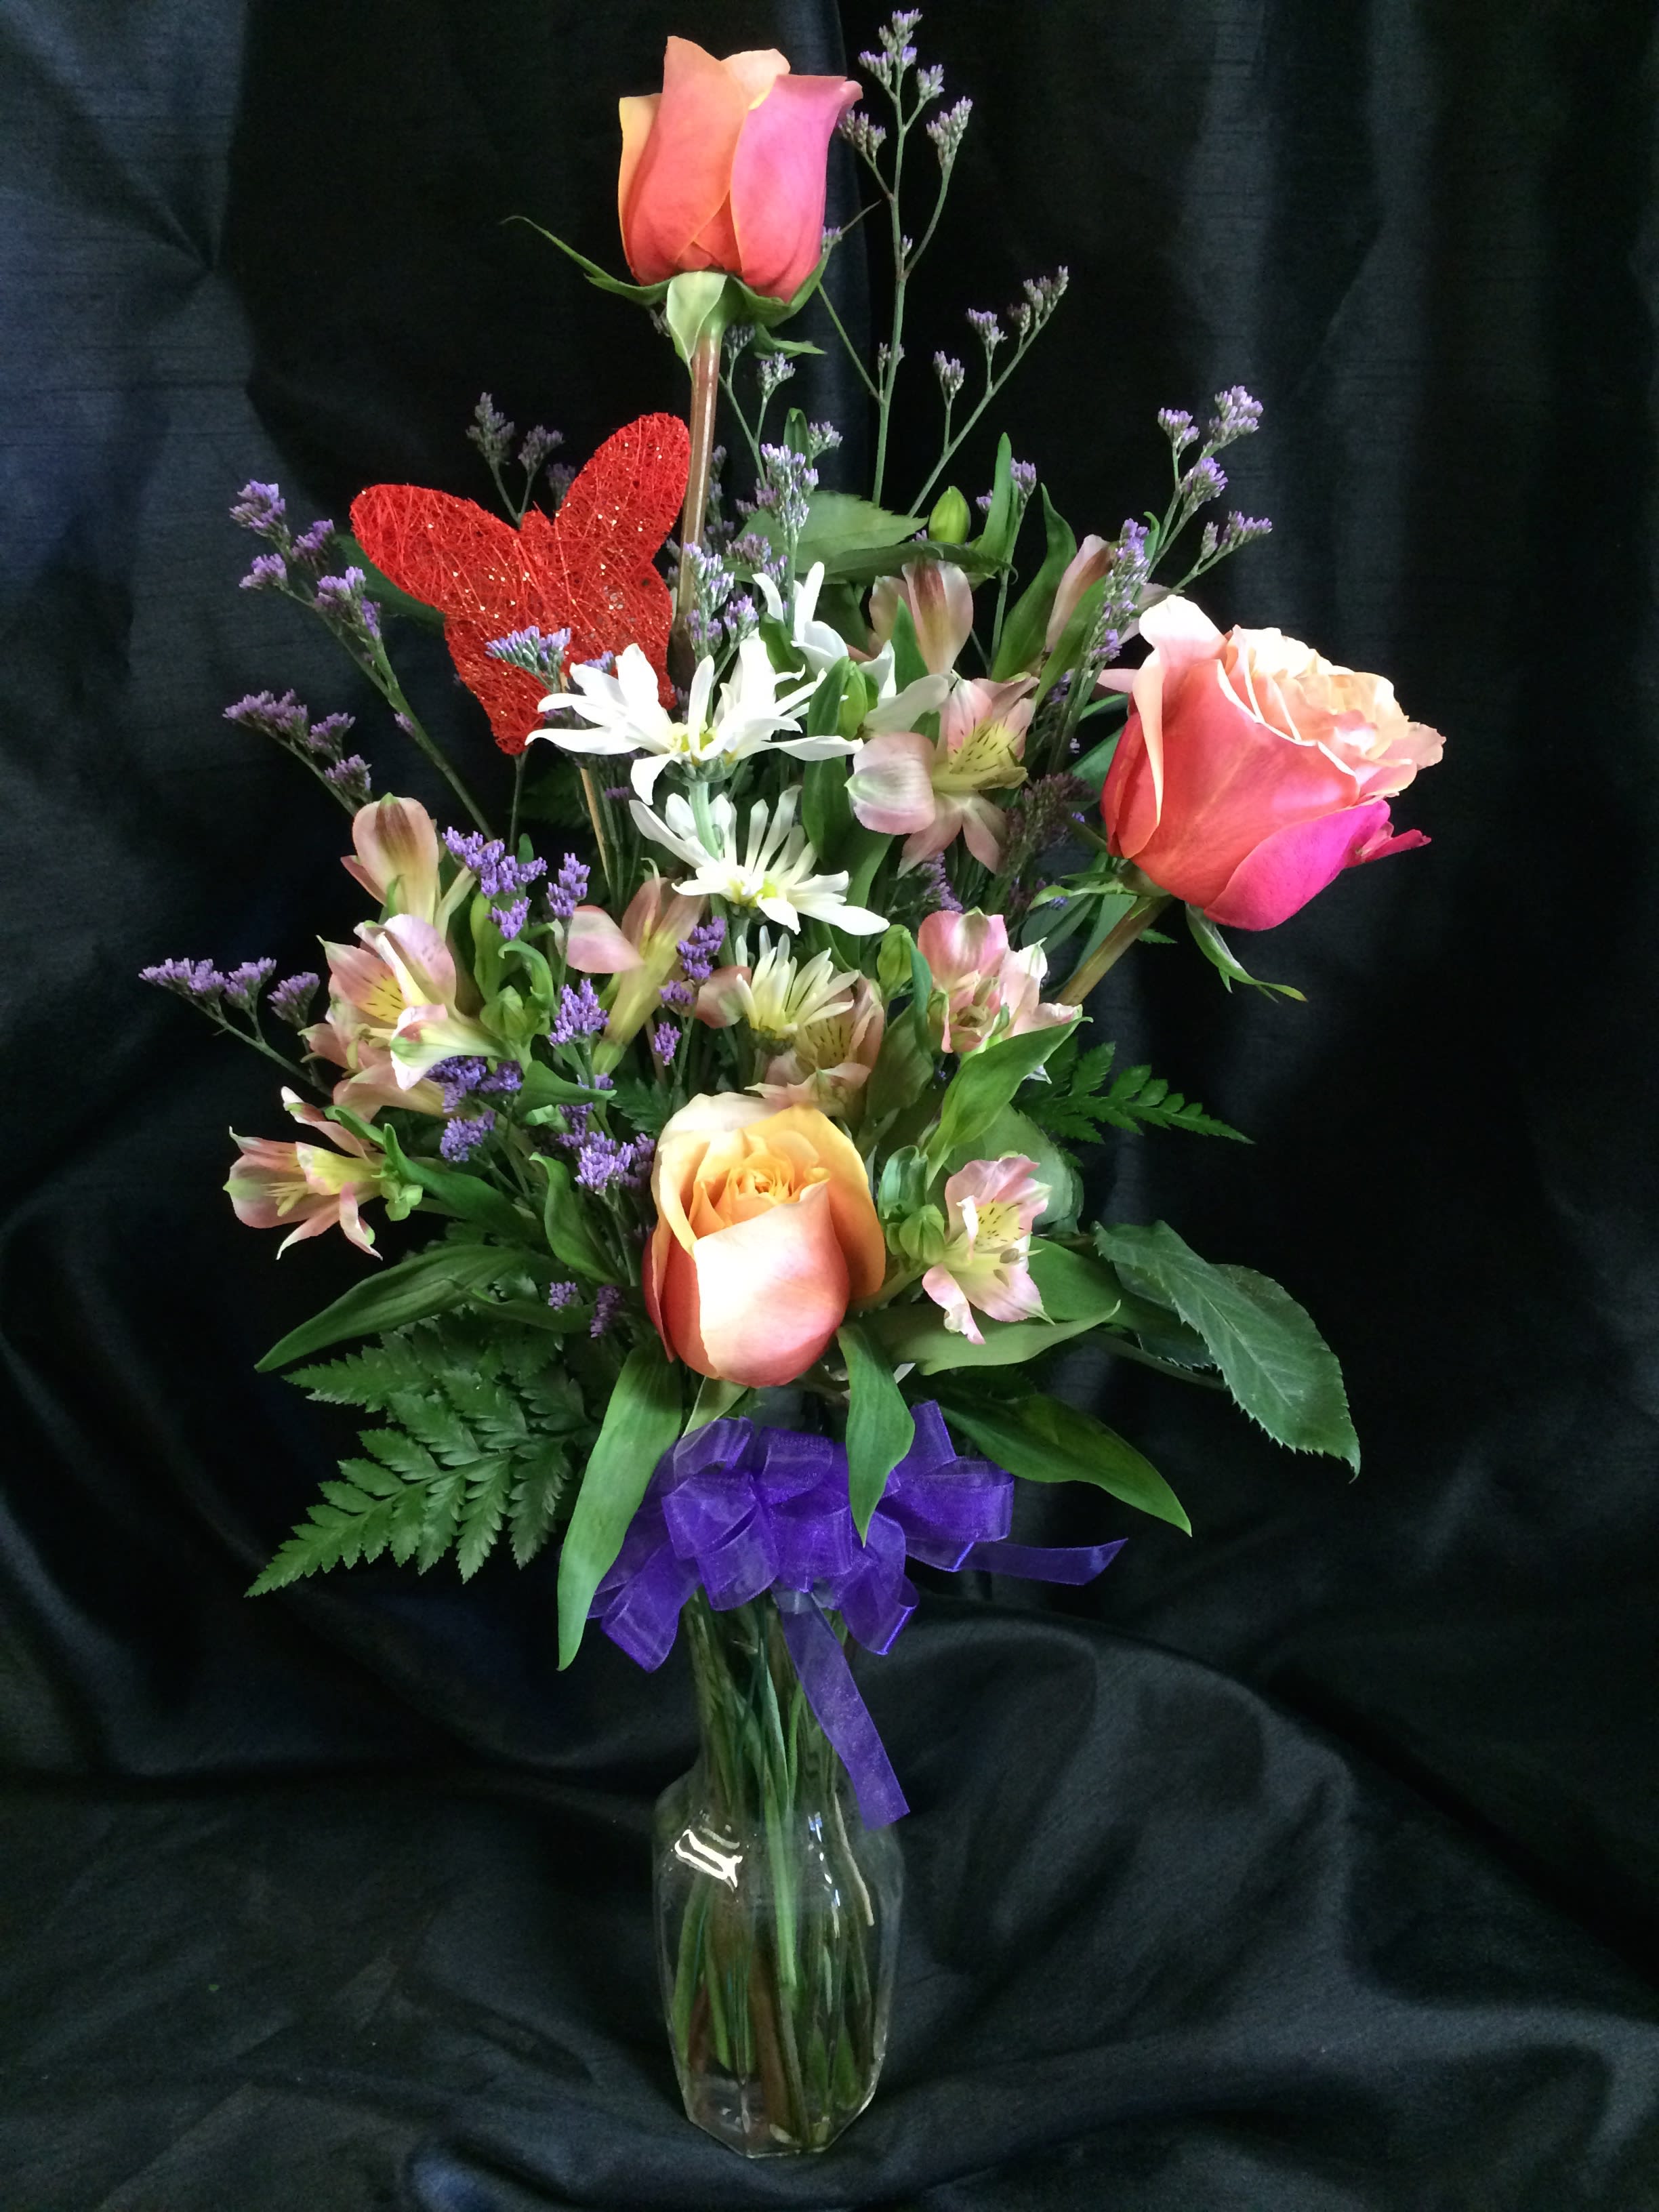 Sweet Moment of Roses - A bud vase of 3 premium roses with accent flowers.